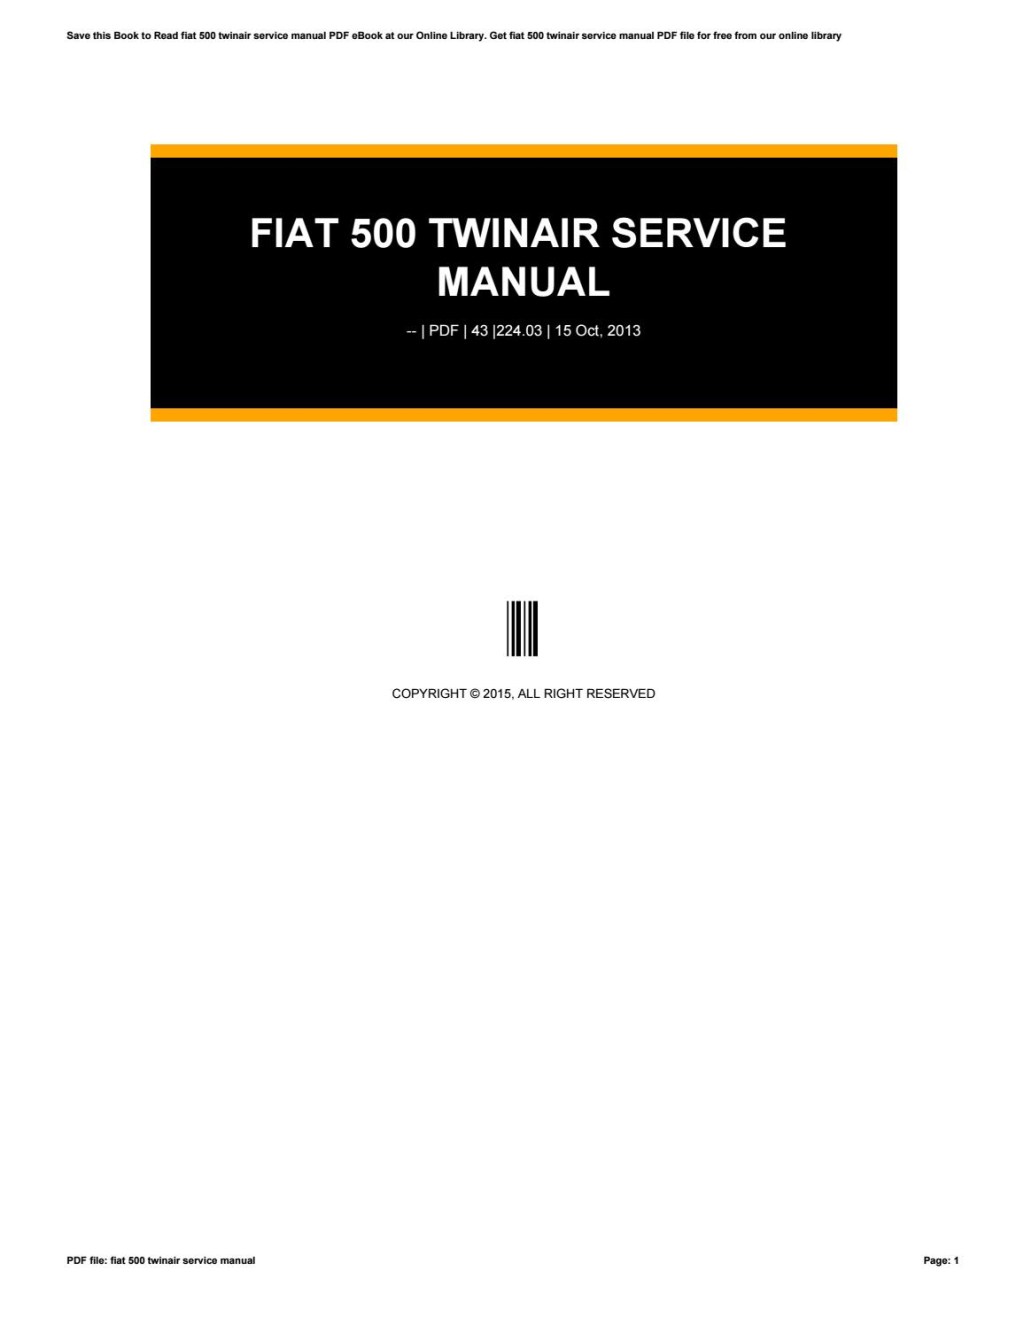 Picture of: Fiat  twinair service manual by irmhaeritha – Issuu